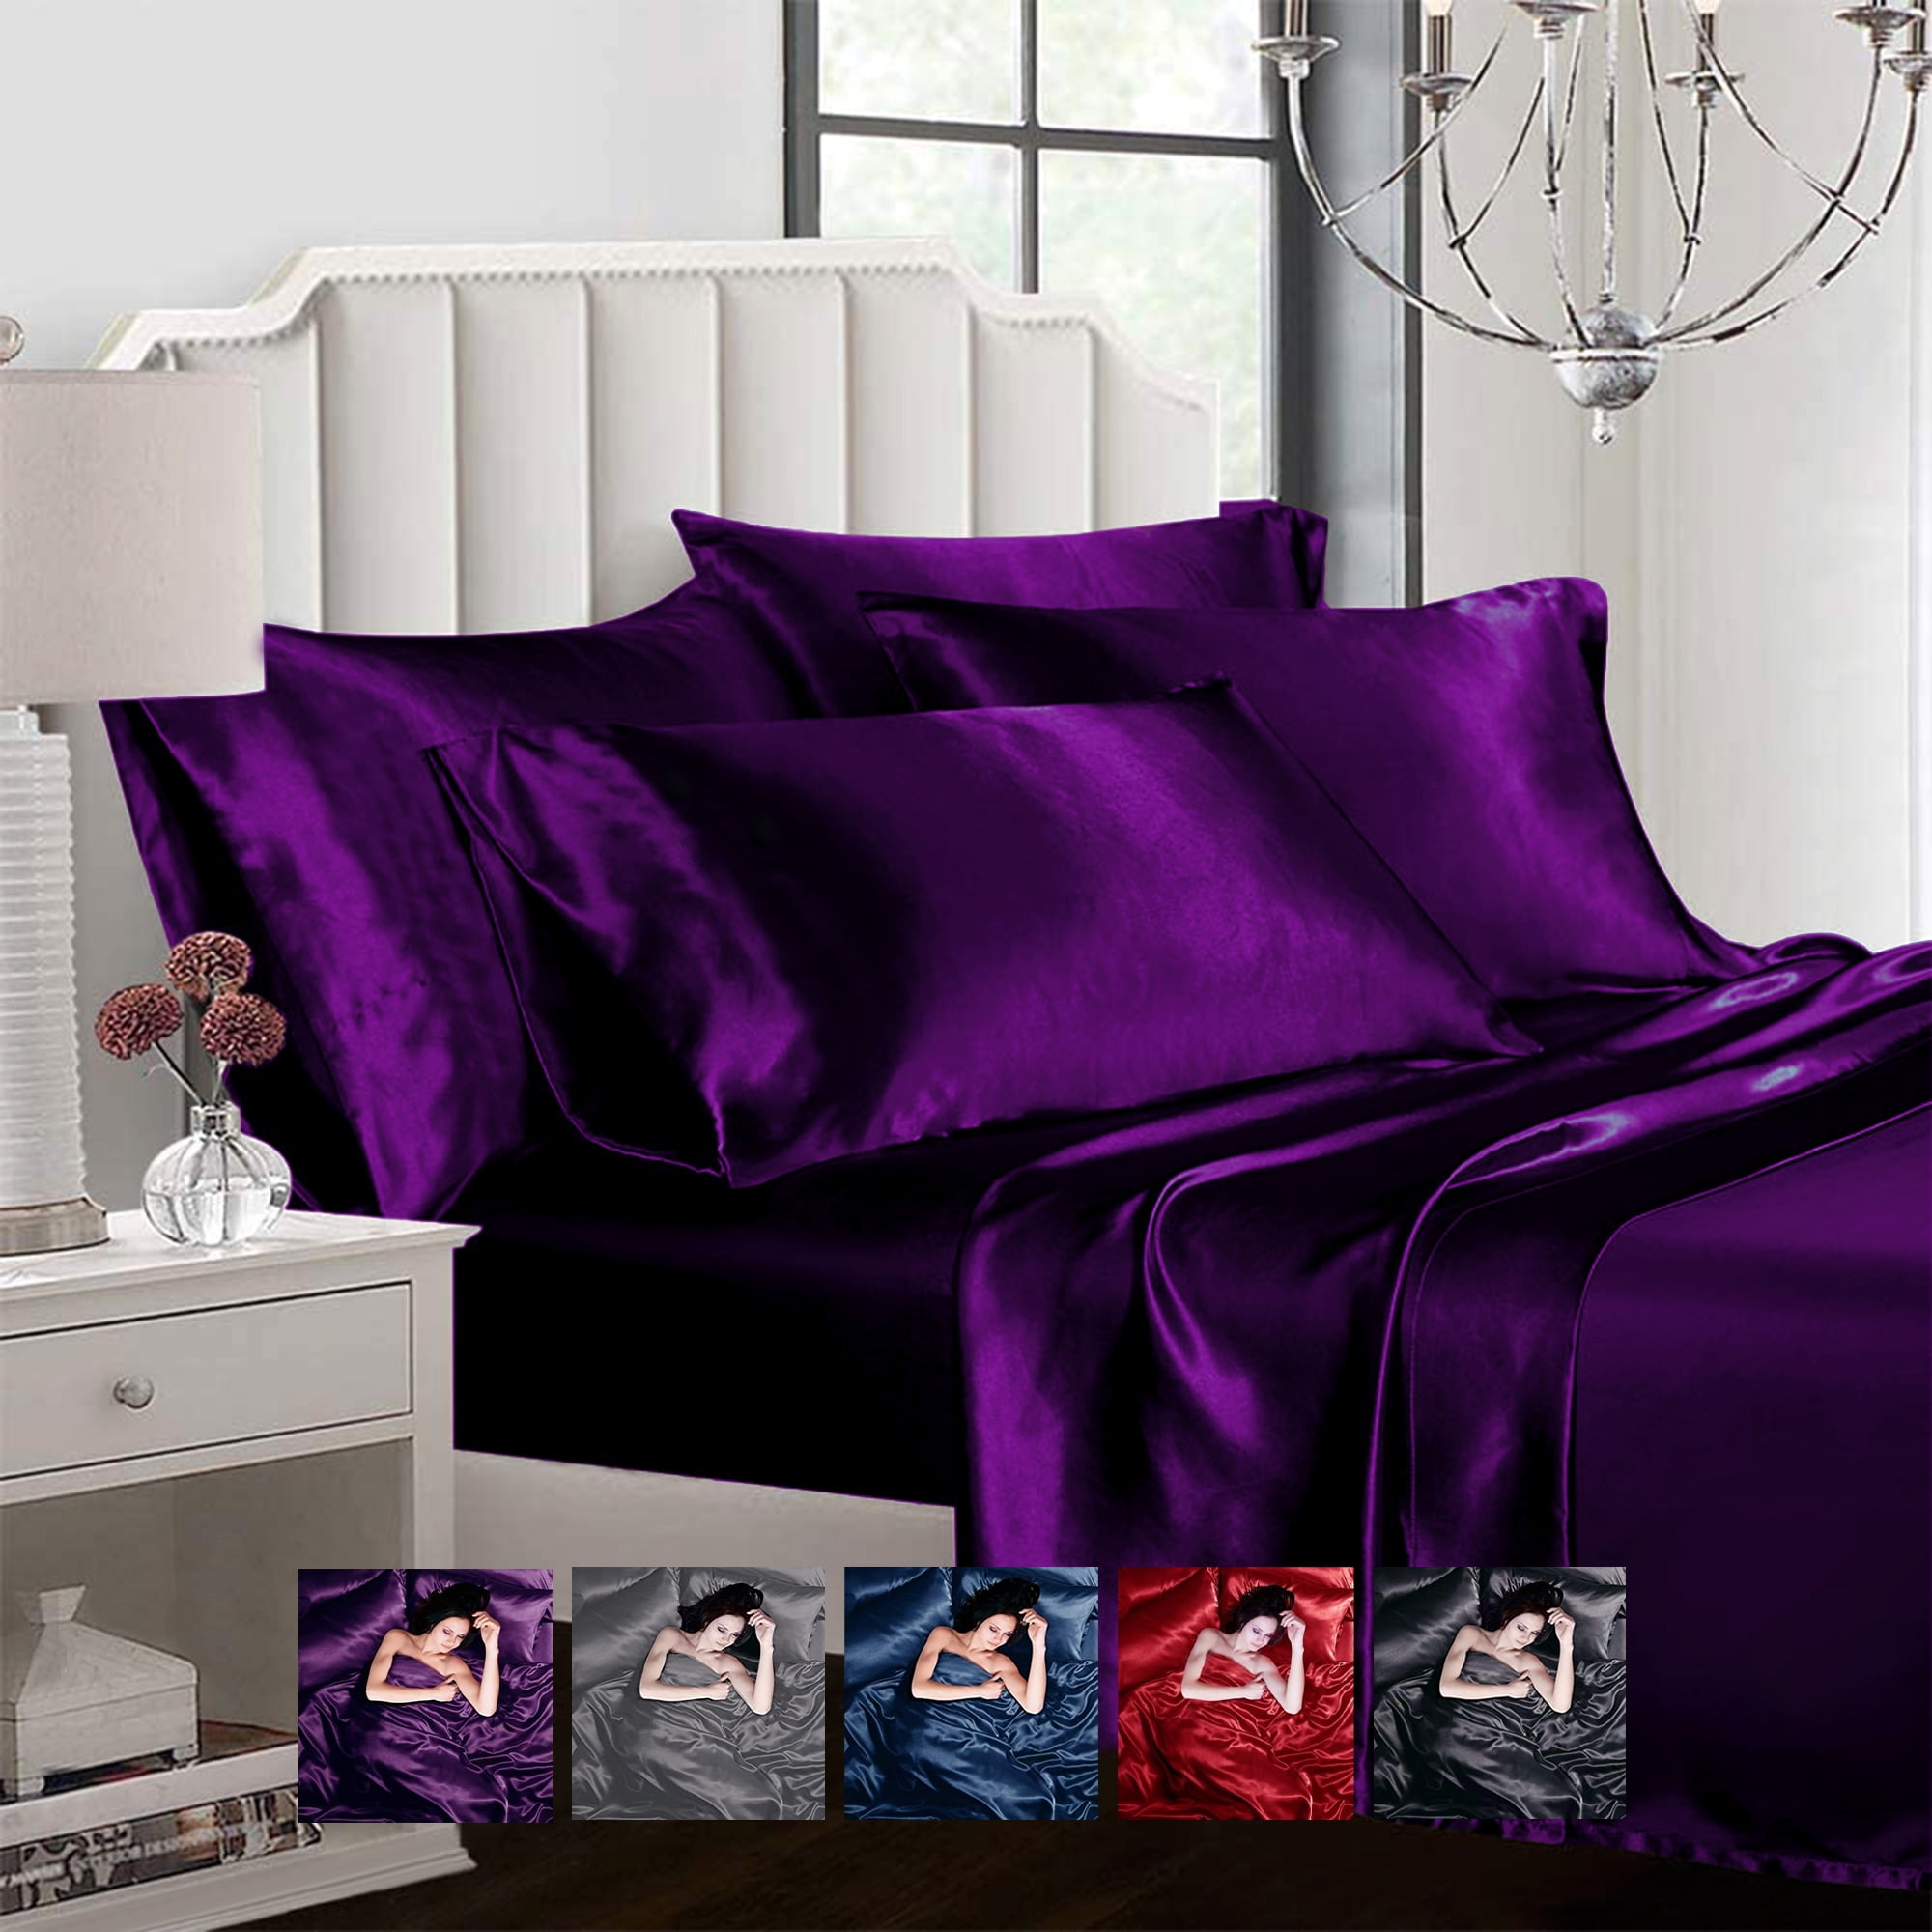 Hotel Luxury 4-Piece Bed Set Extra Deep Poc Details about   Sfoothome Purple Queen Sheets Set 